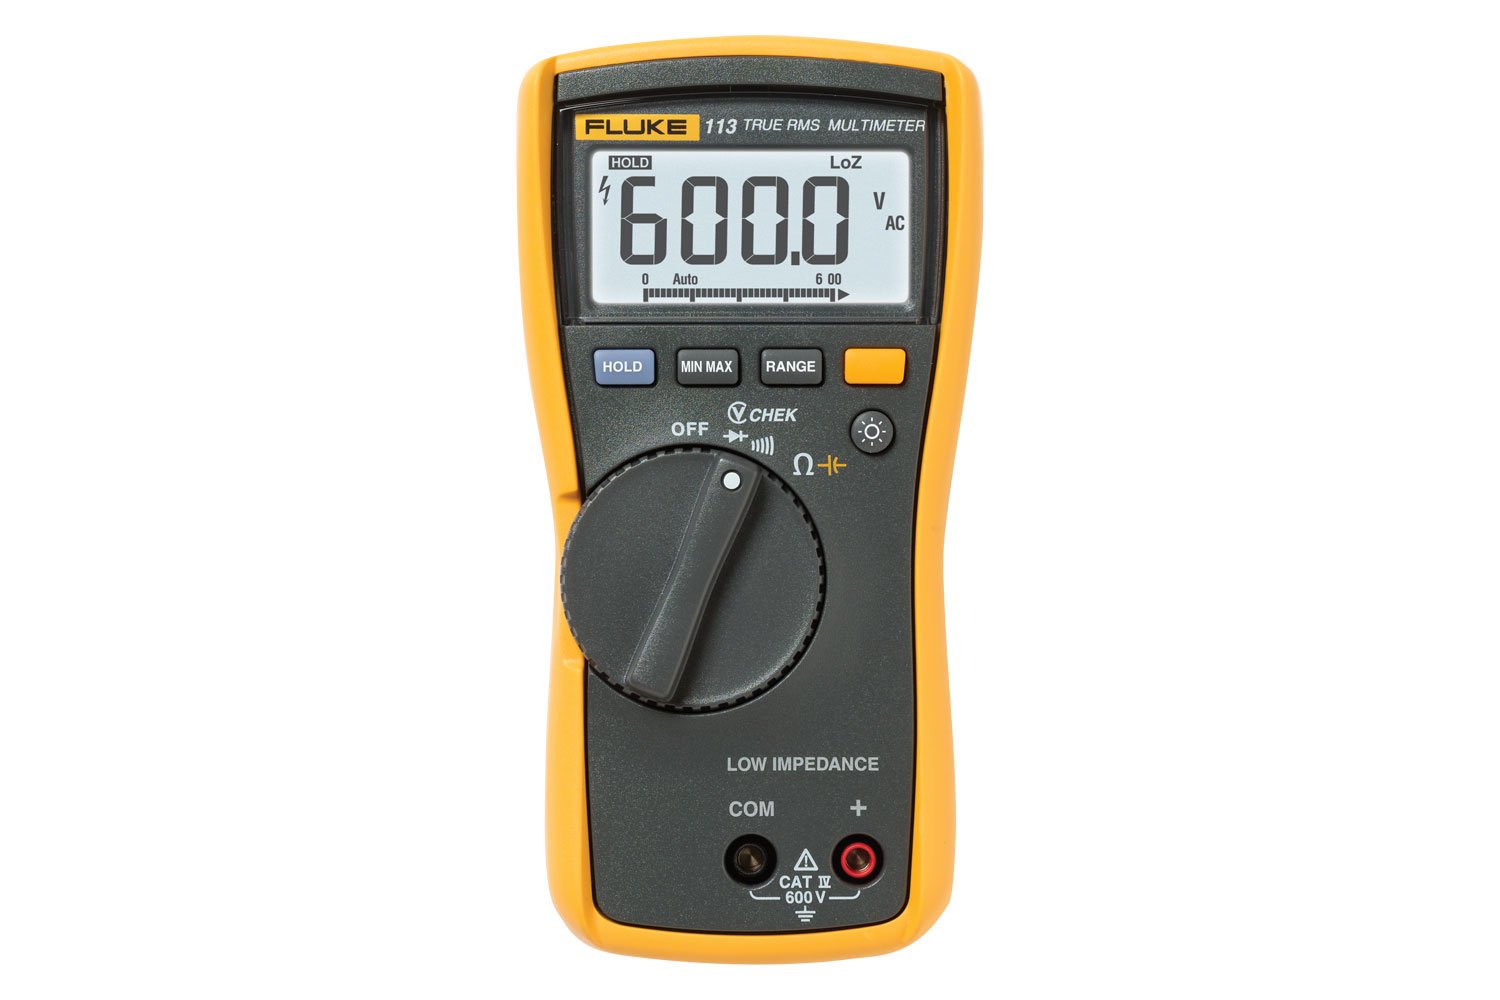 7 function digital multimeter tests AC/DC voltage Free Shipping 